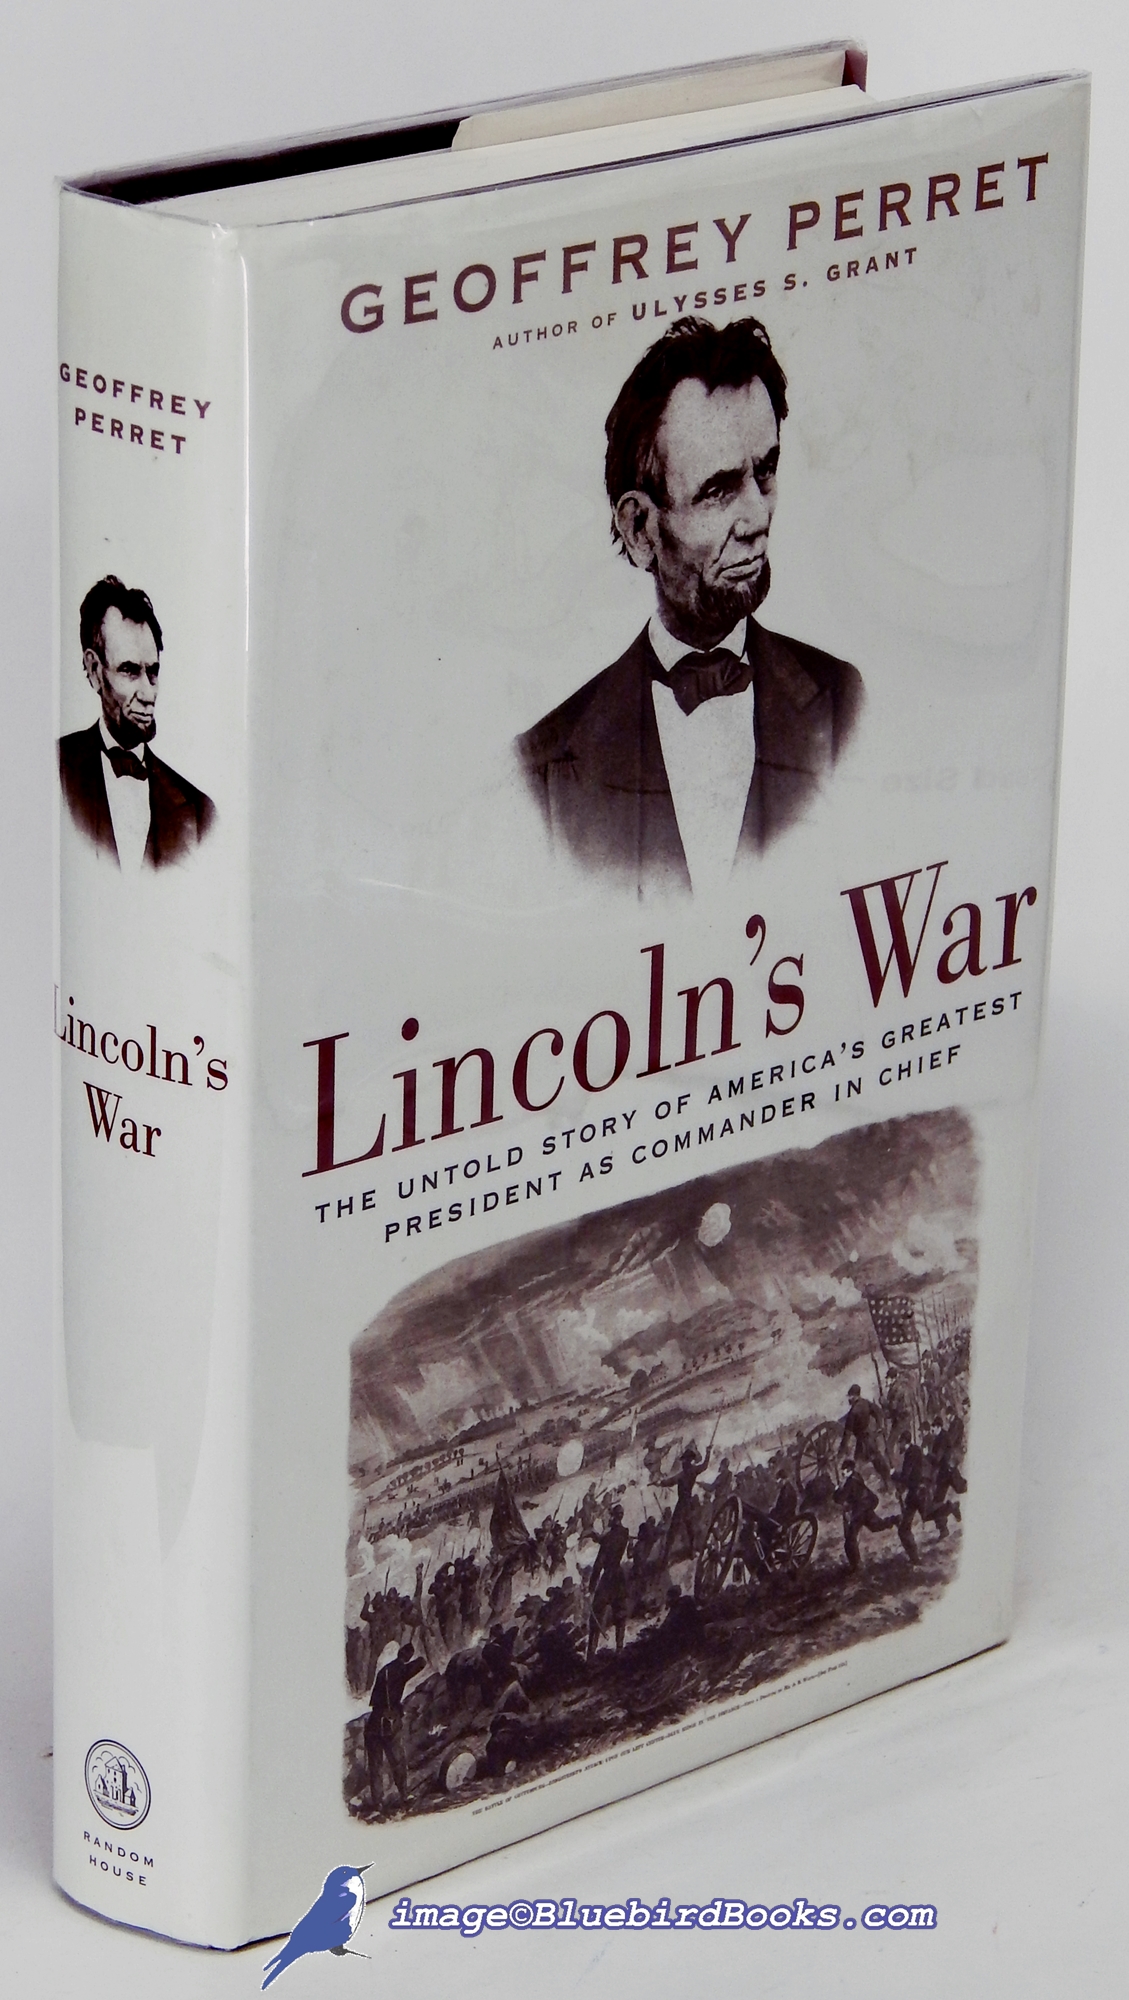 PERRET, GEOFFREY - Lincoln's War: The Untold Story of America's Greatest President As Commander in Chief